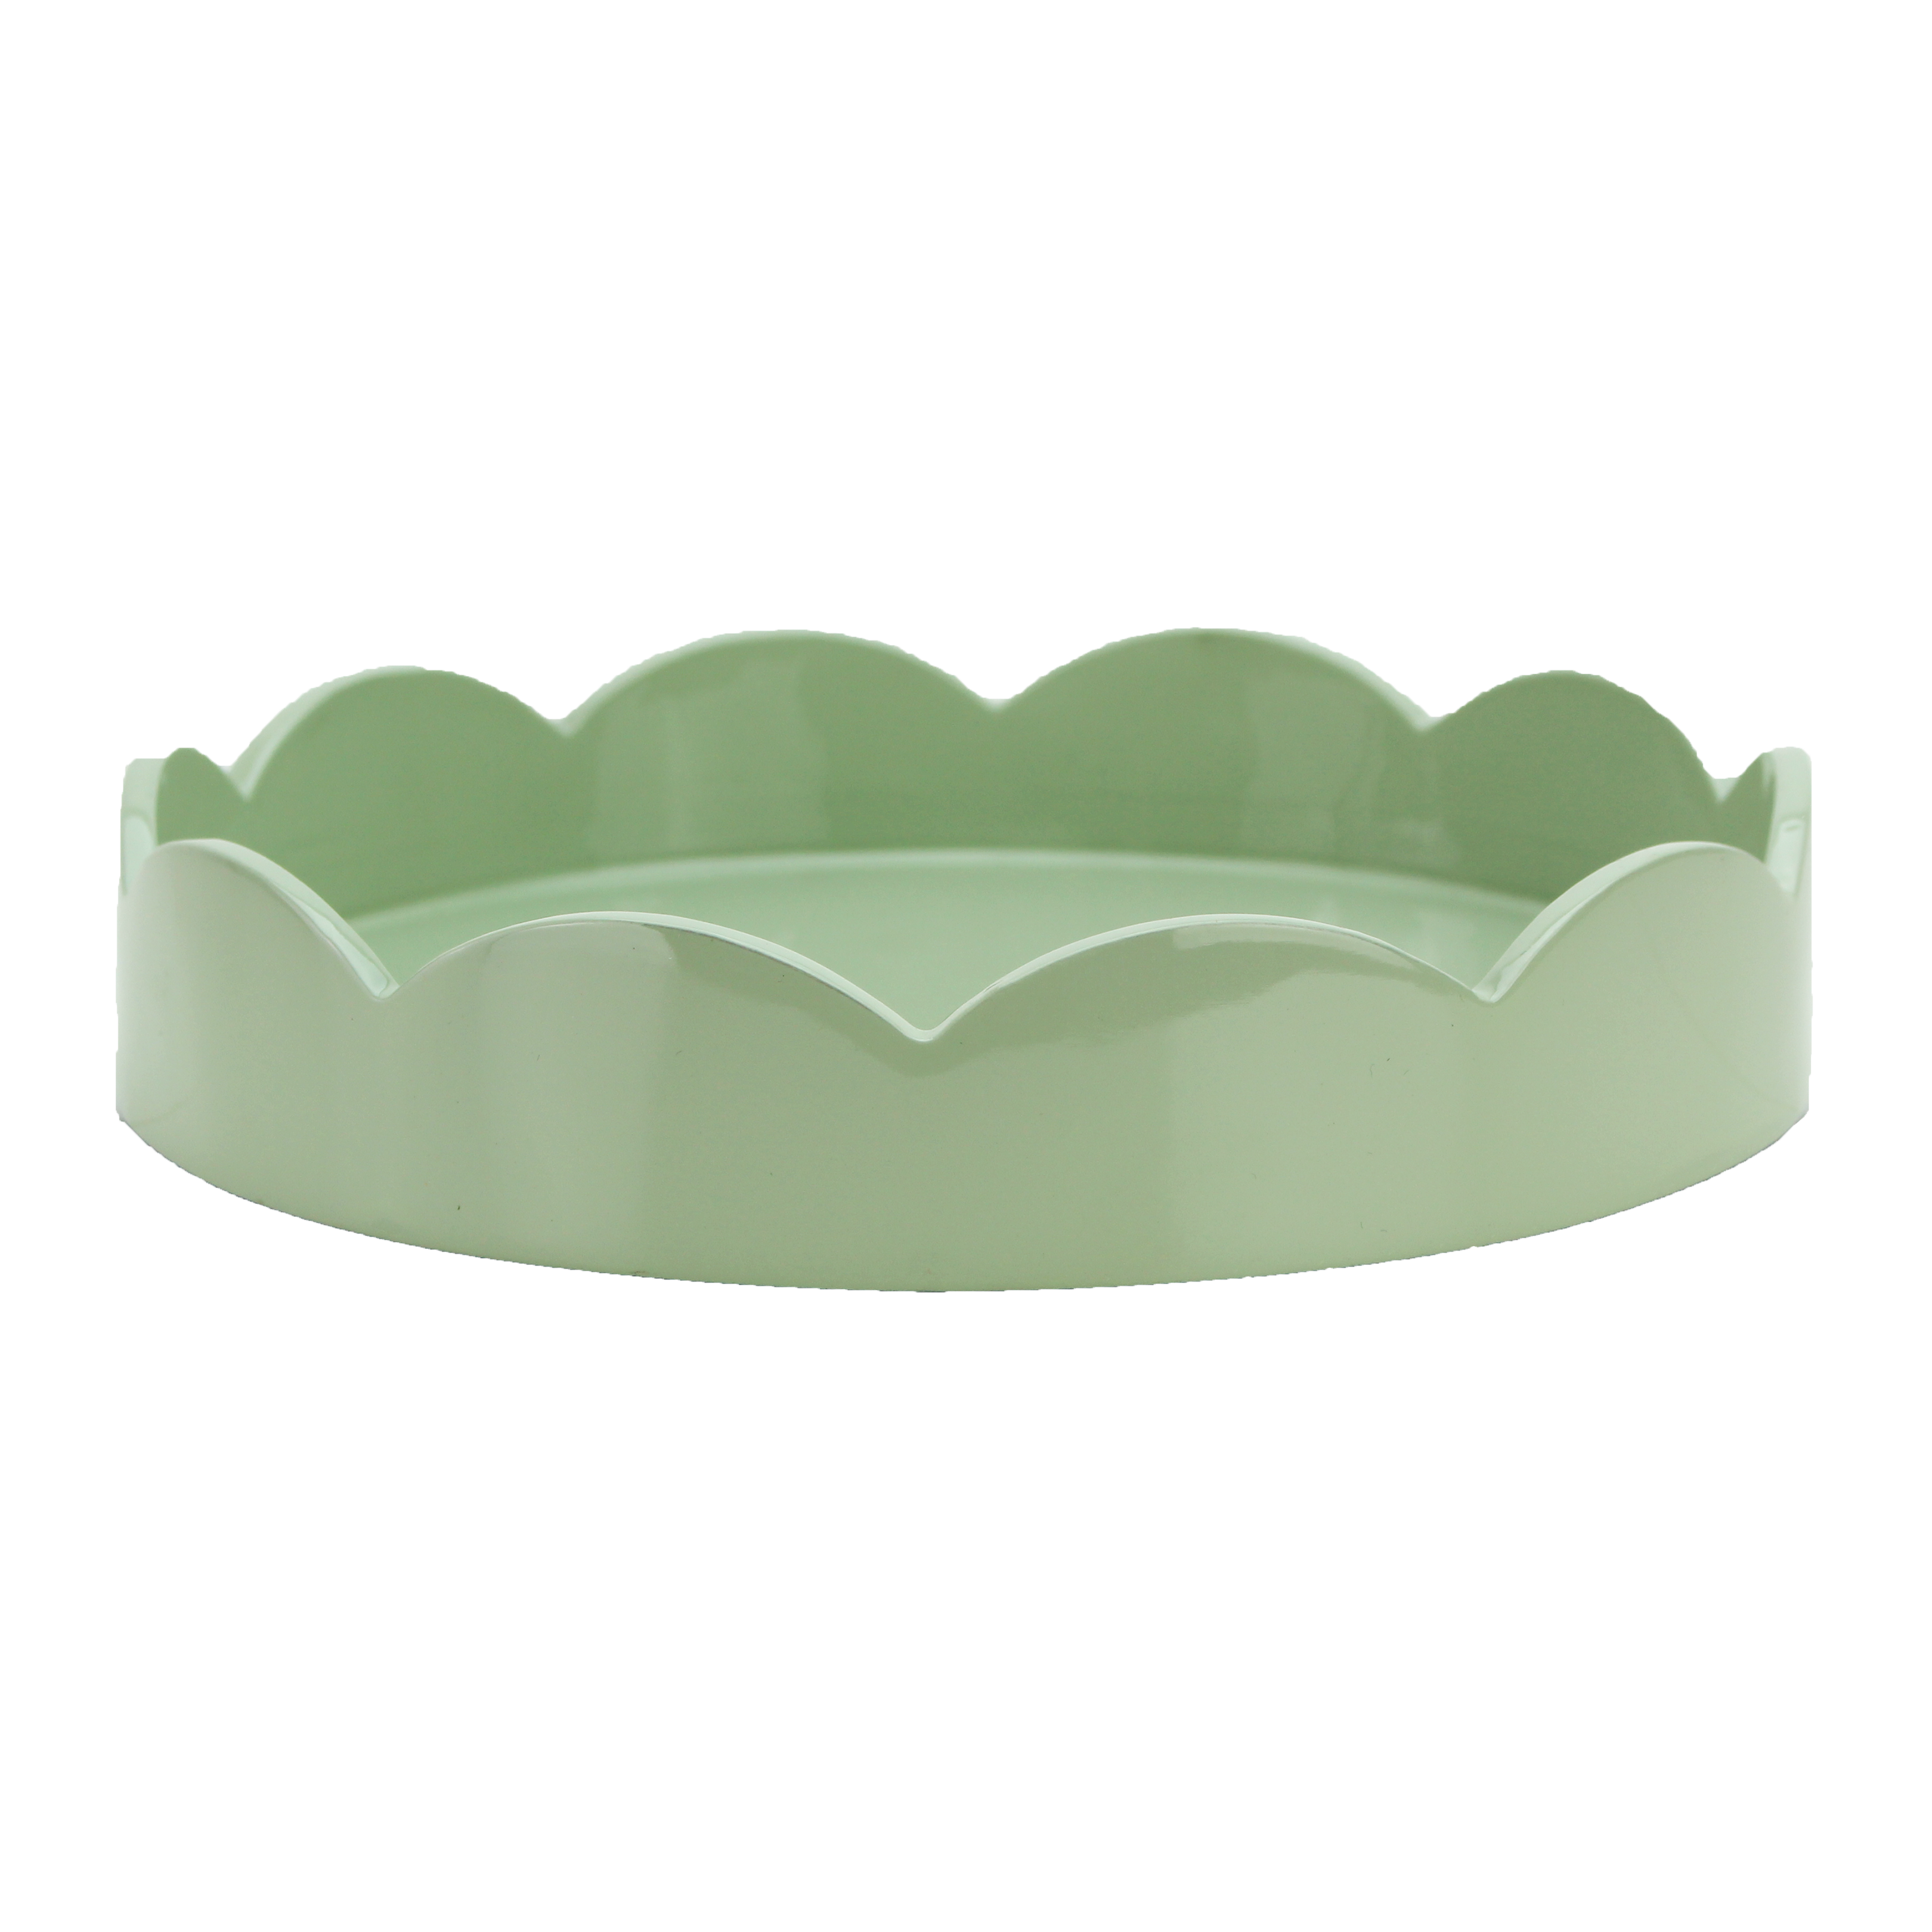 Round scalloped tray in sage green